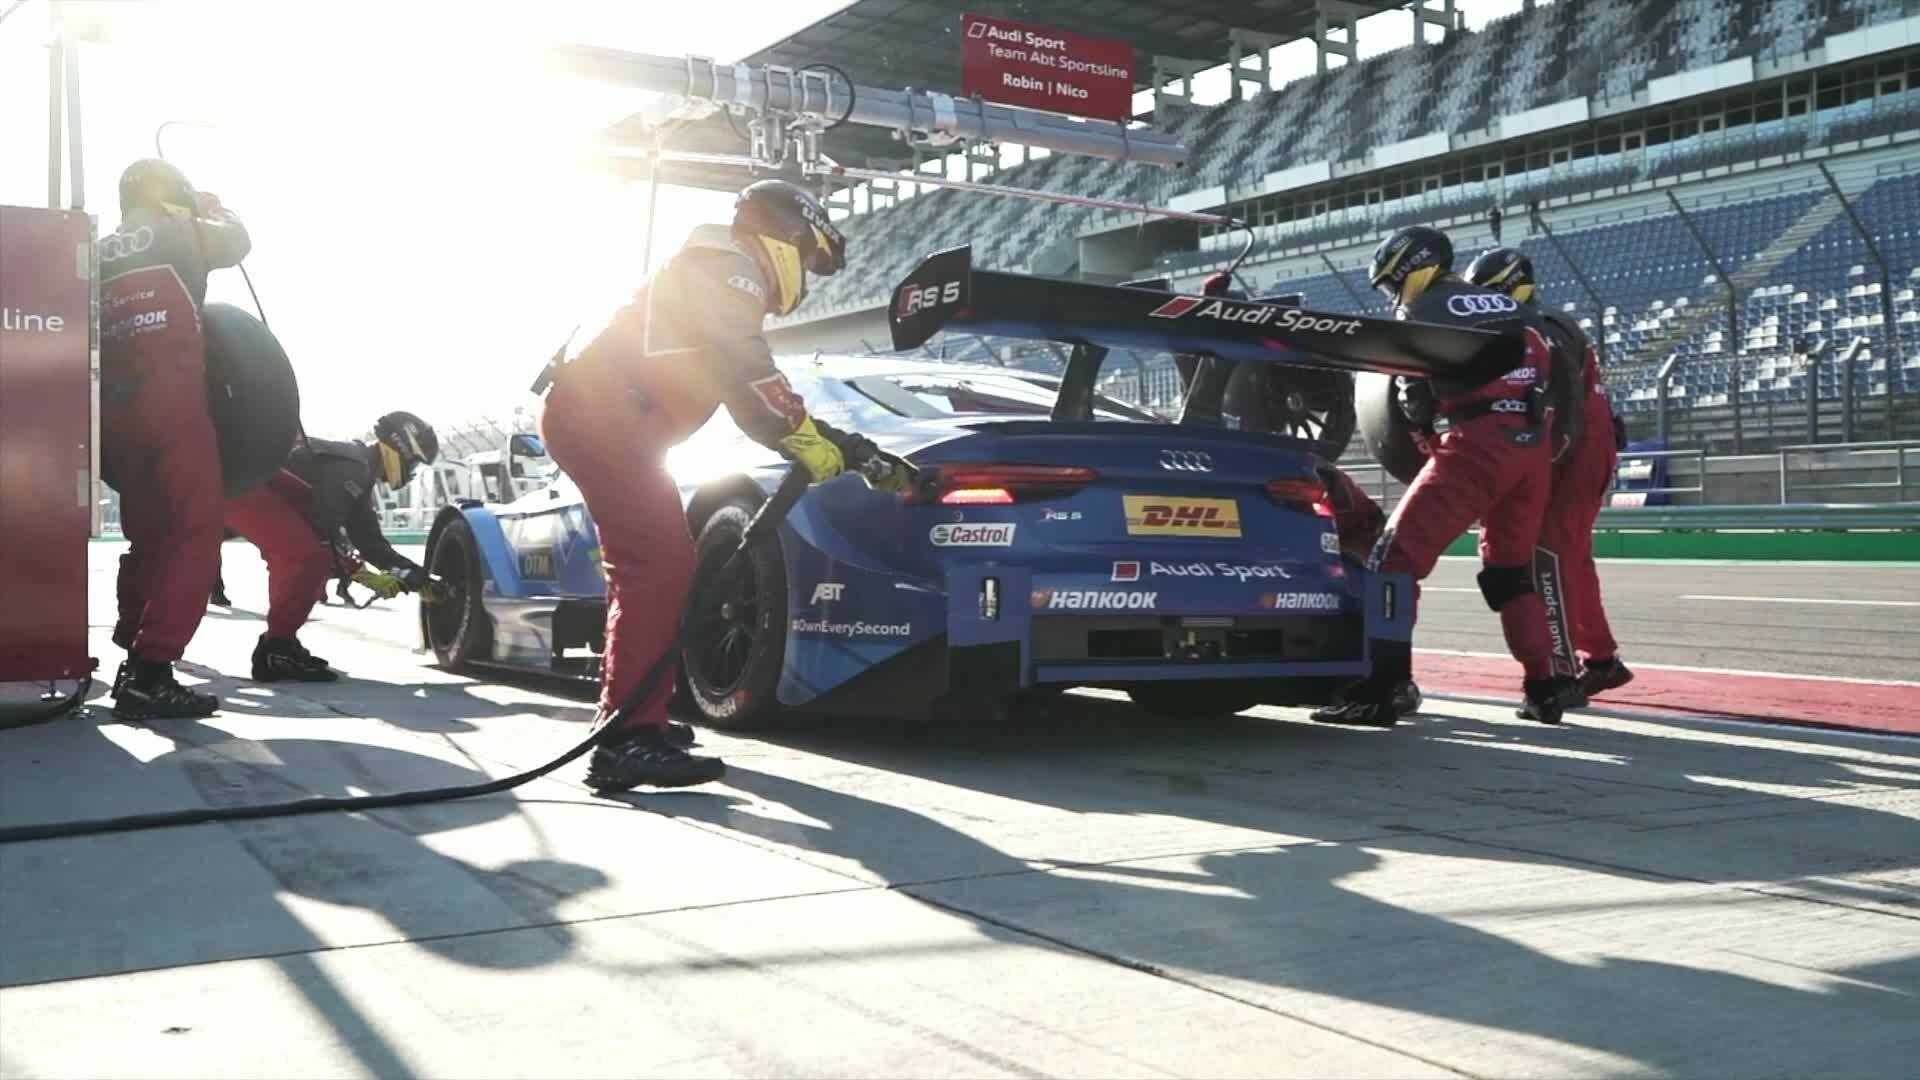 DTM  “dress rehearsal” at the Lausitzring